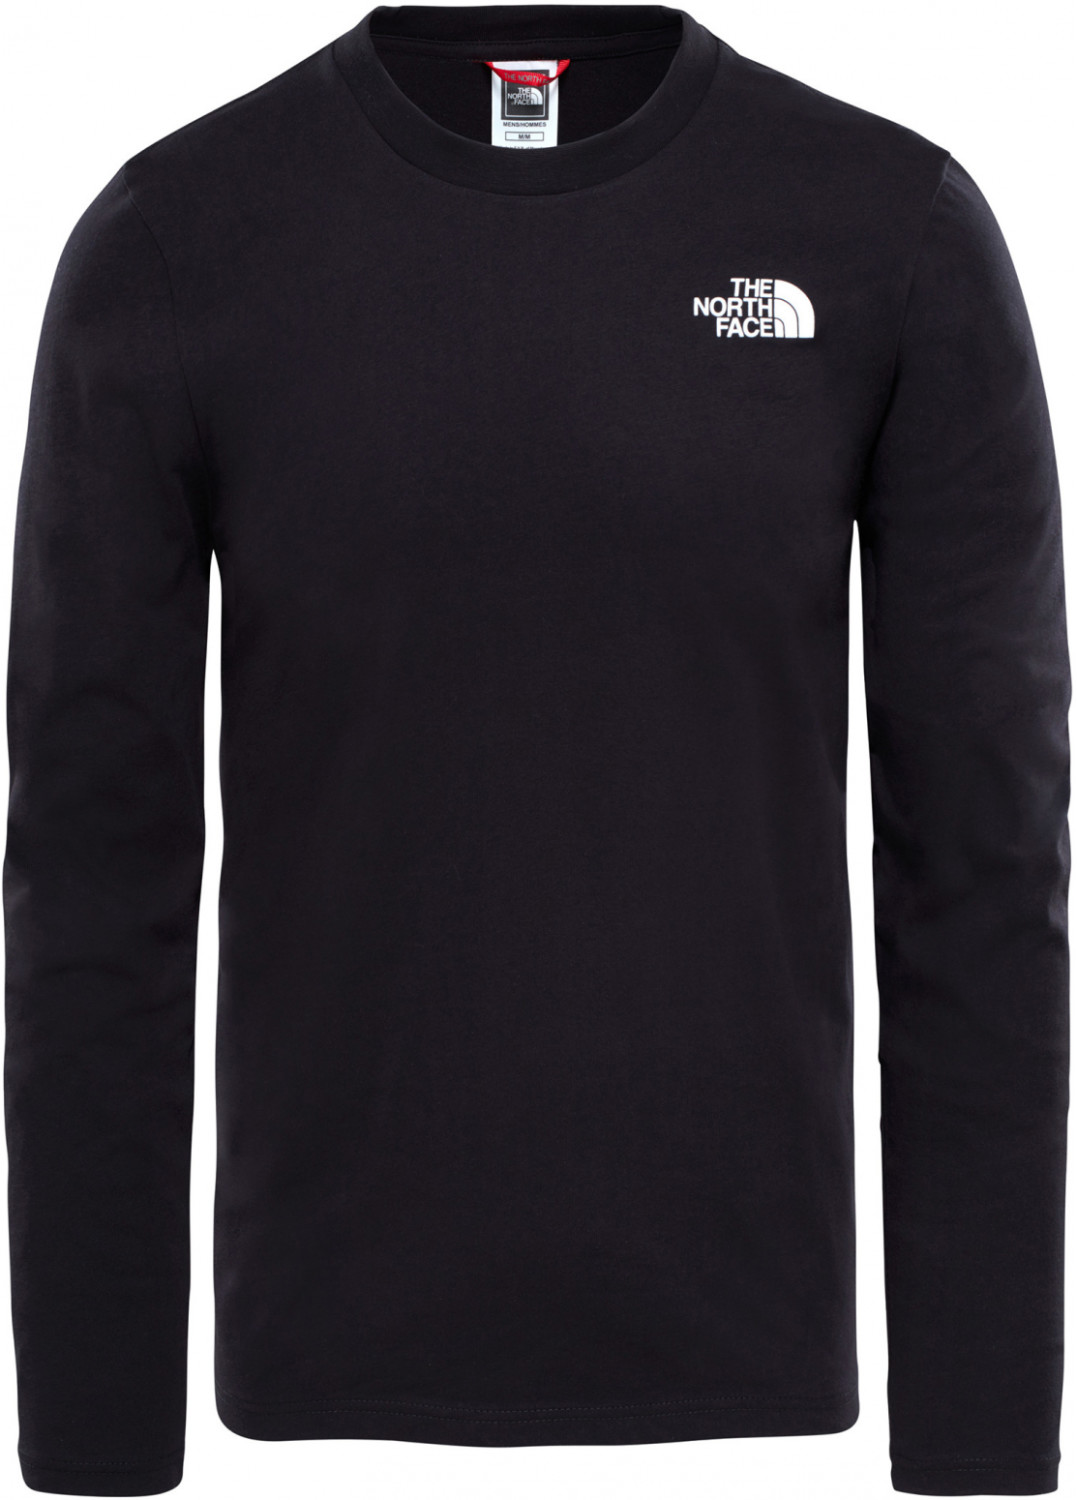 Buy The North Face Men's Easy Long-Sleeve T-Shirt tnf black from £25.95 ...